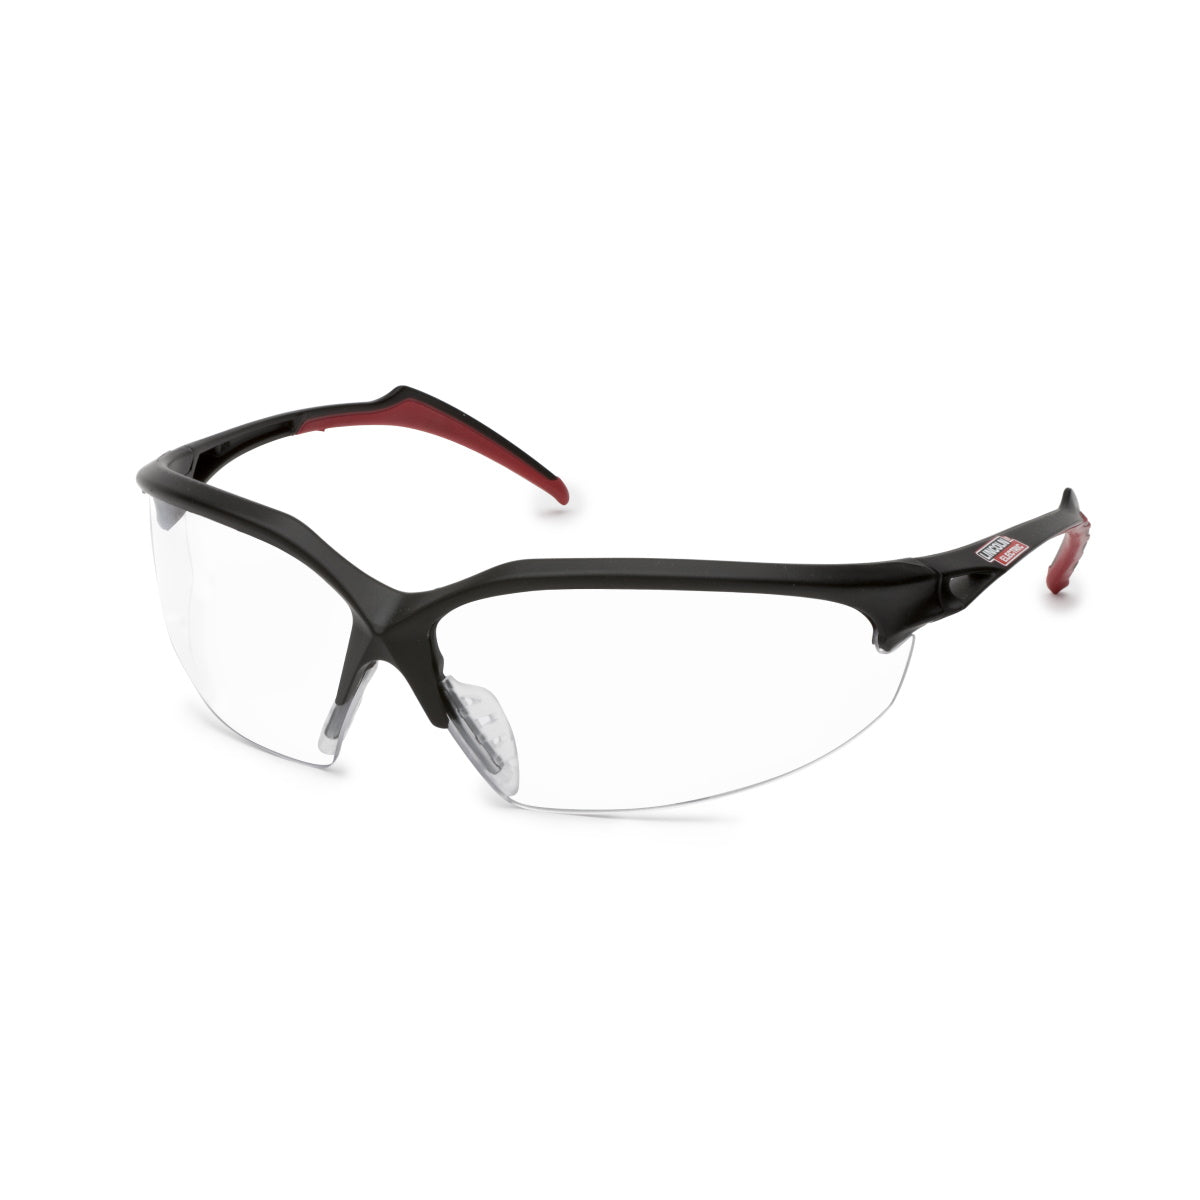 Lincoln Finish Line Clear Safety Glasses (K2966-1)